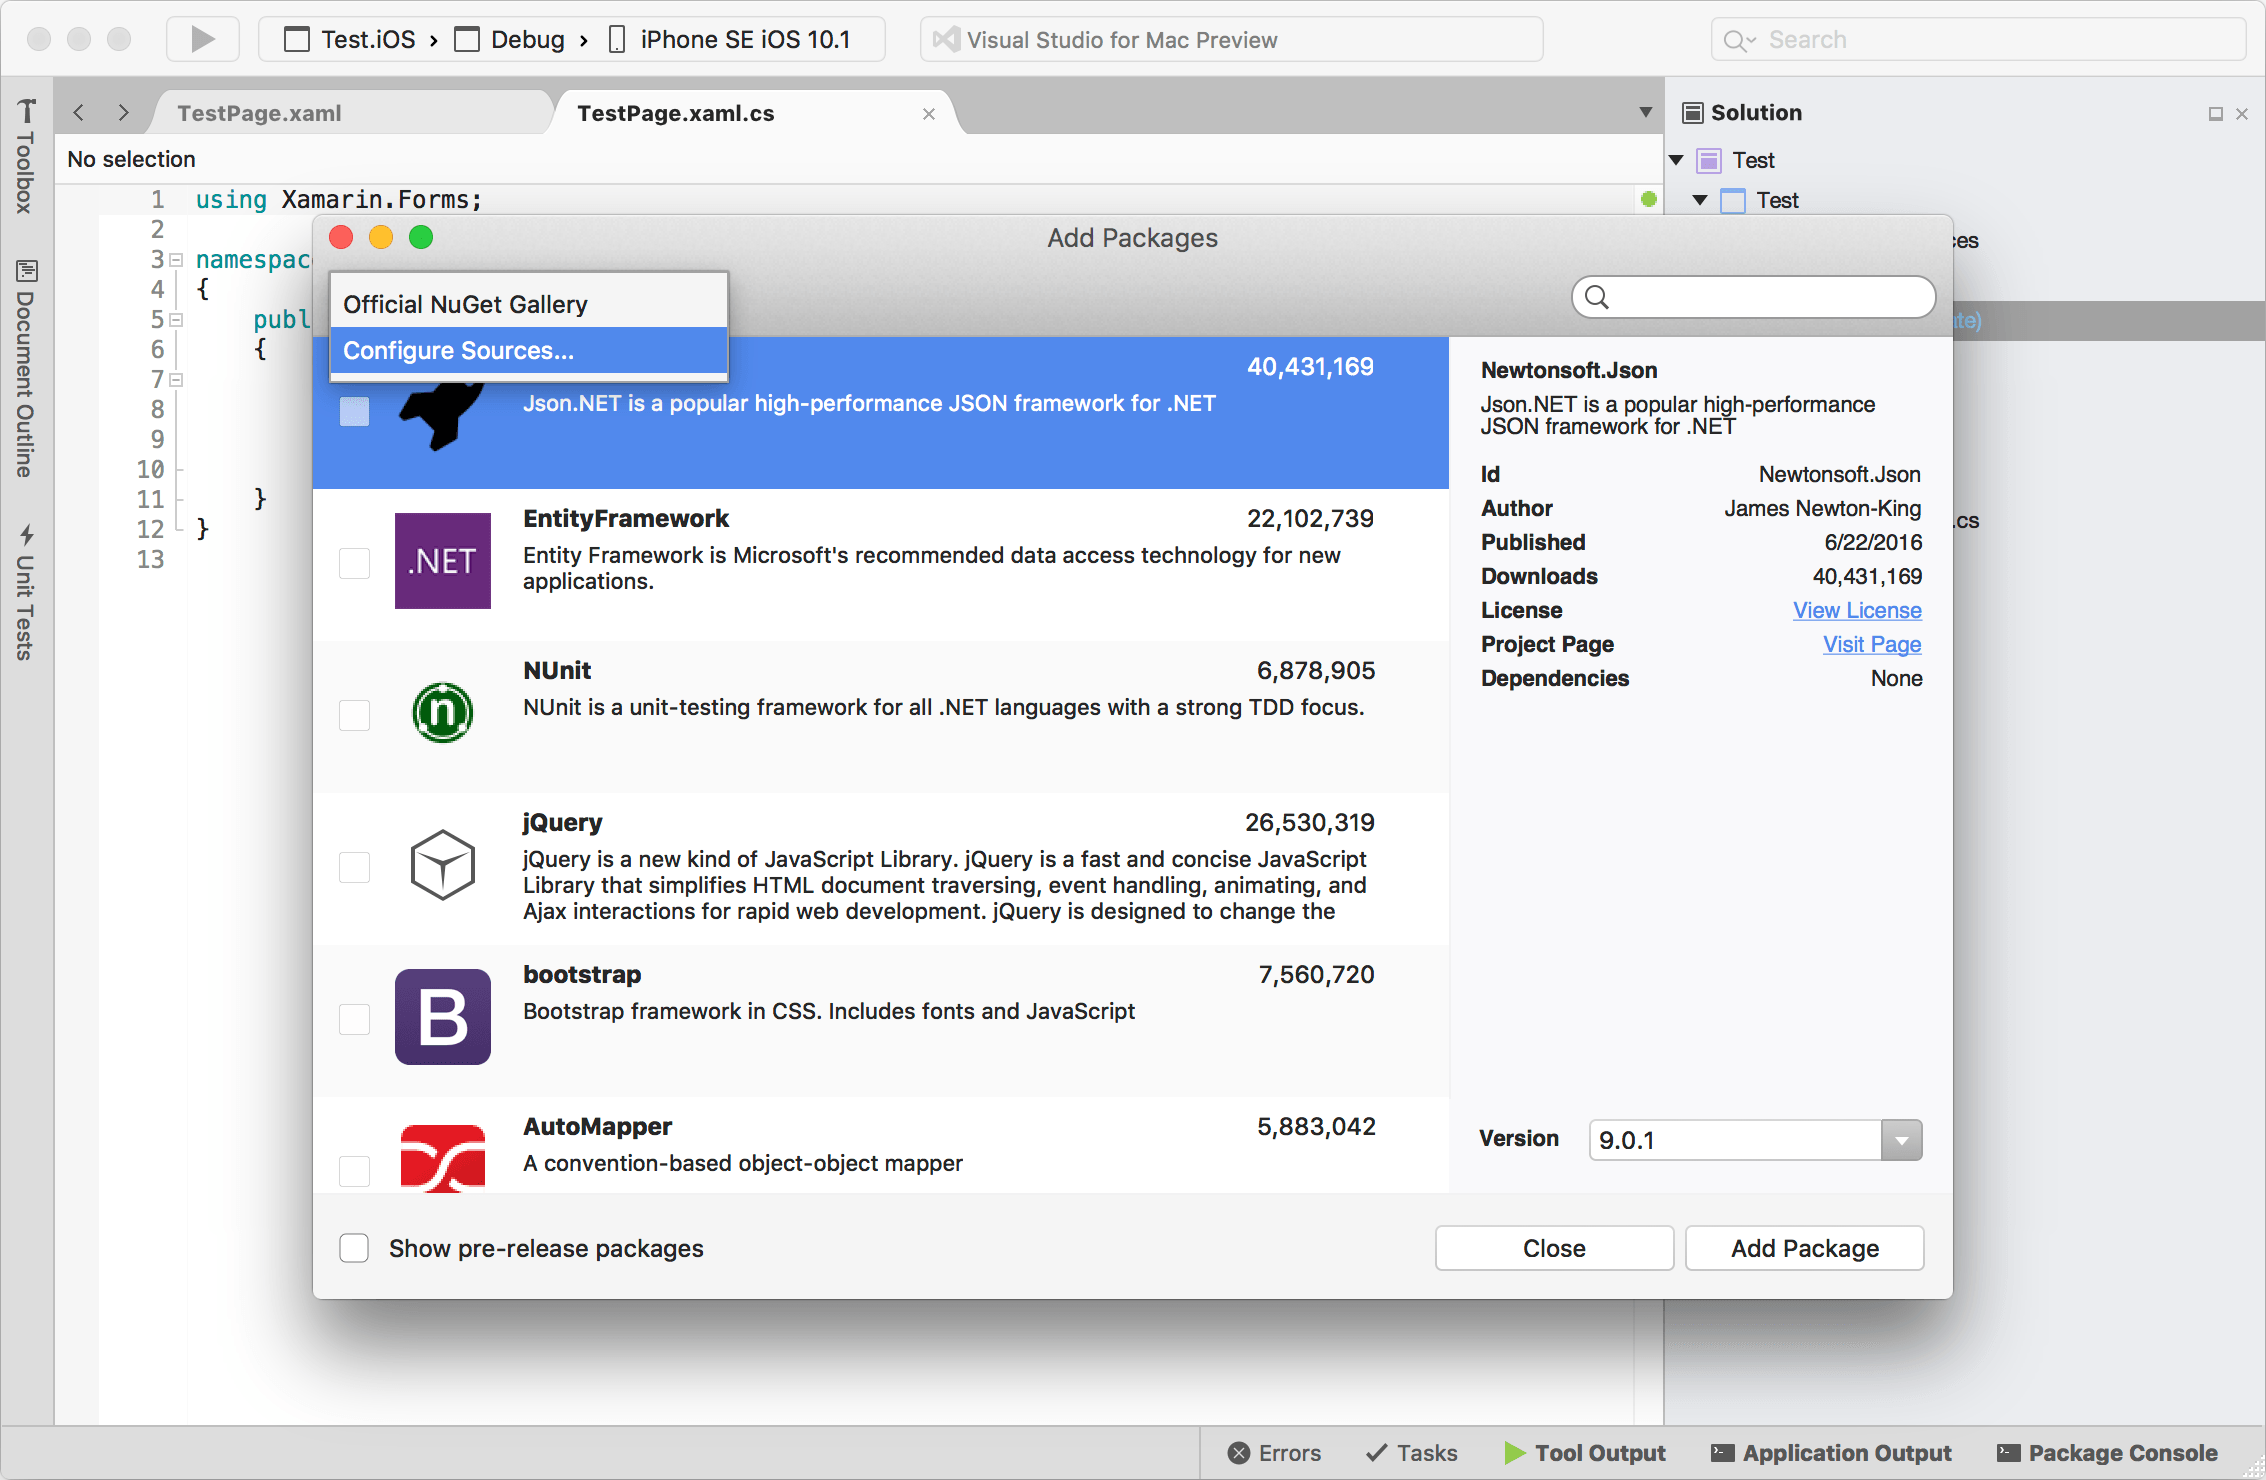 can you get visual studio for mac